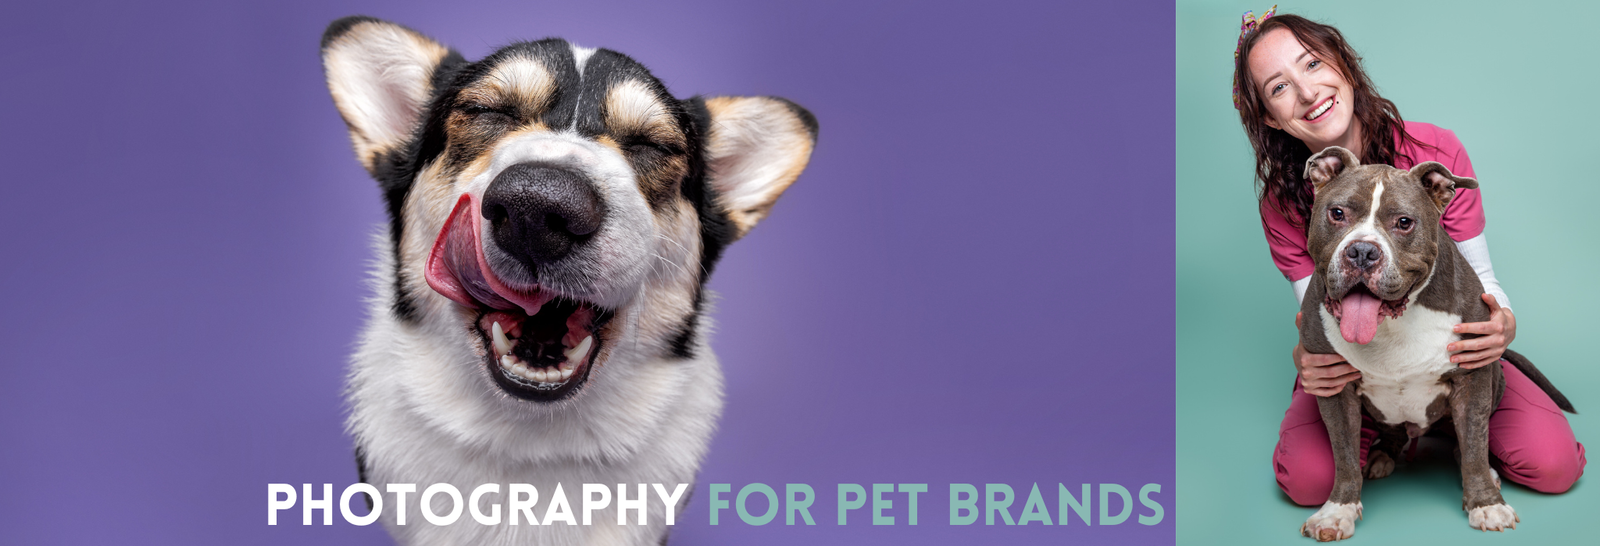 Photography for pet brands